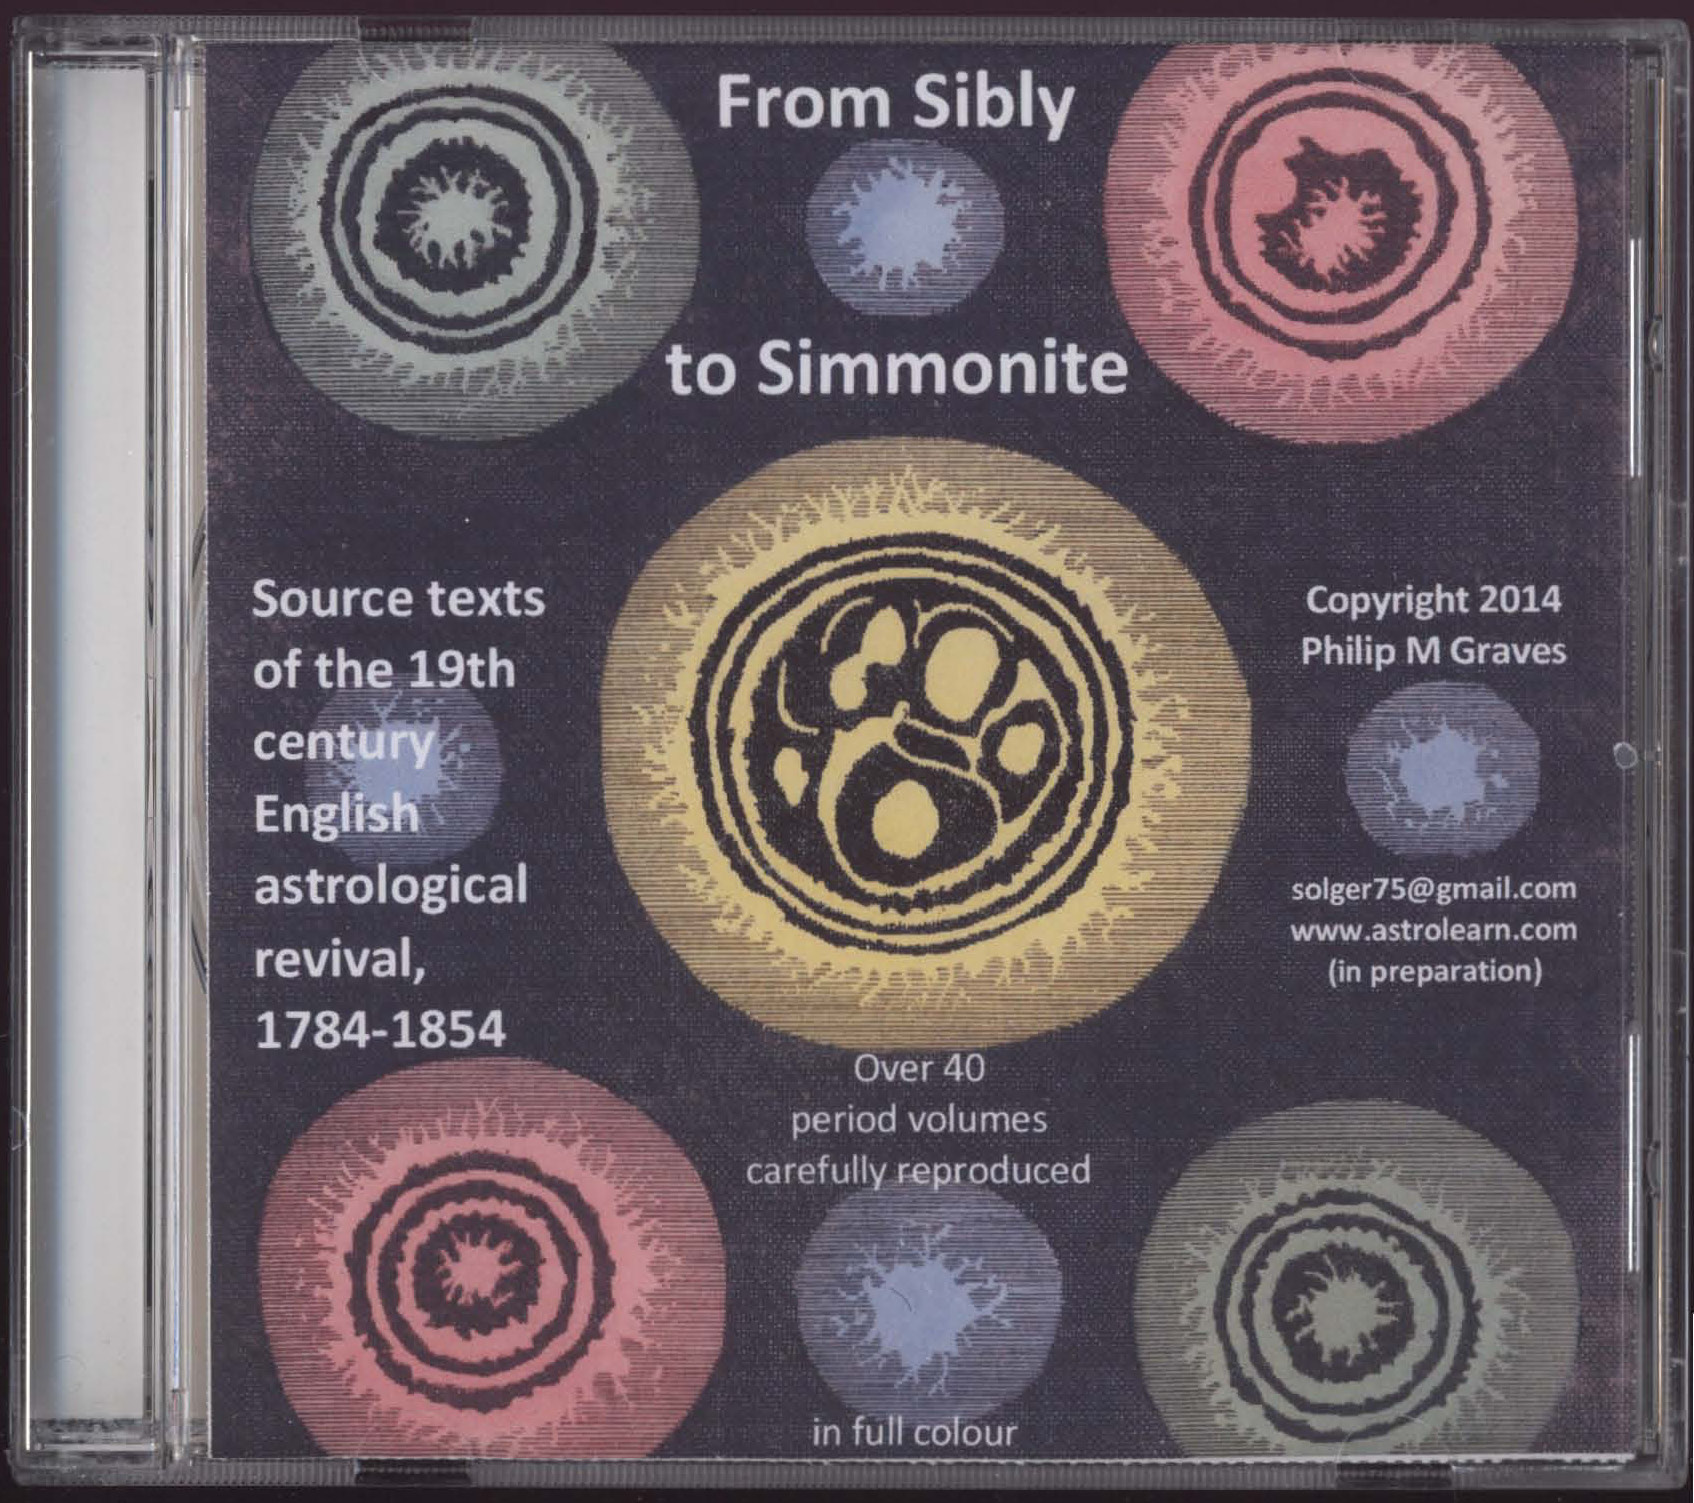 From Sibly to Simmonite: Source Texts of the 19th century English astrological revival DVD, Front Cover